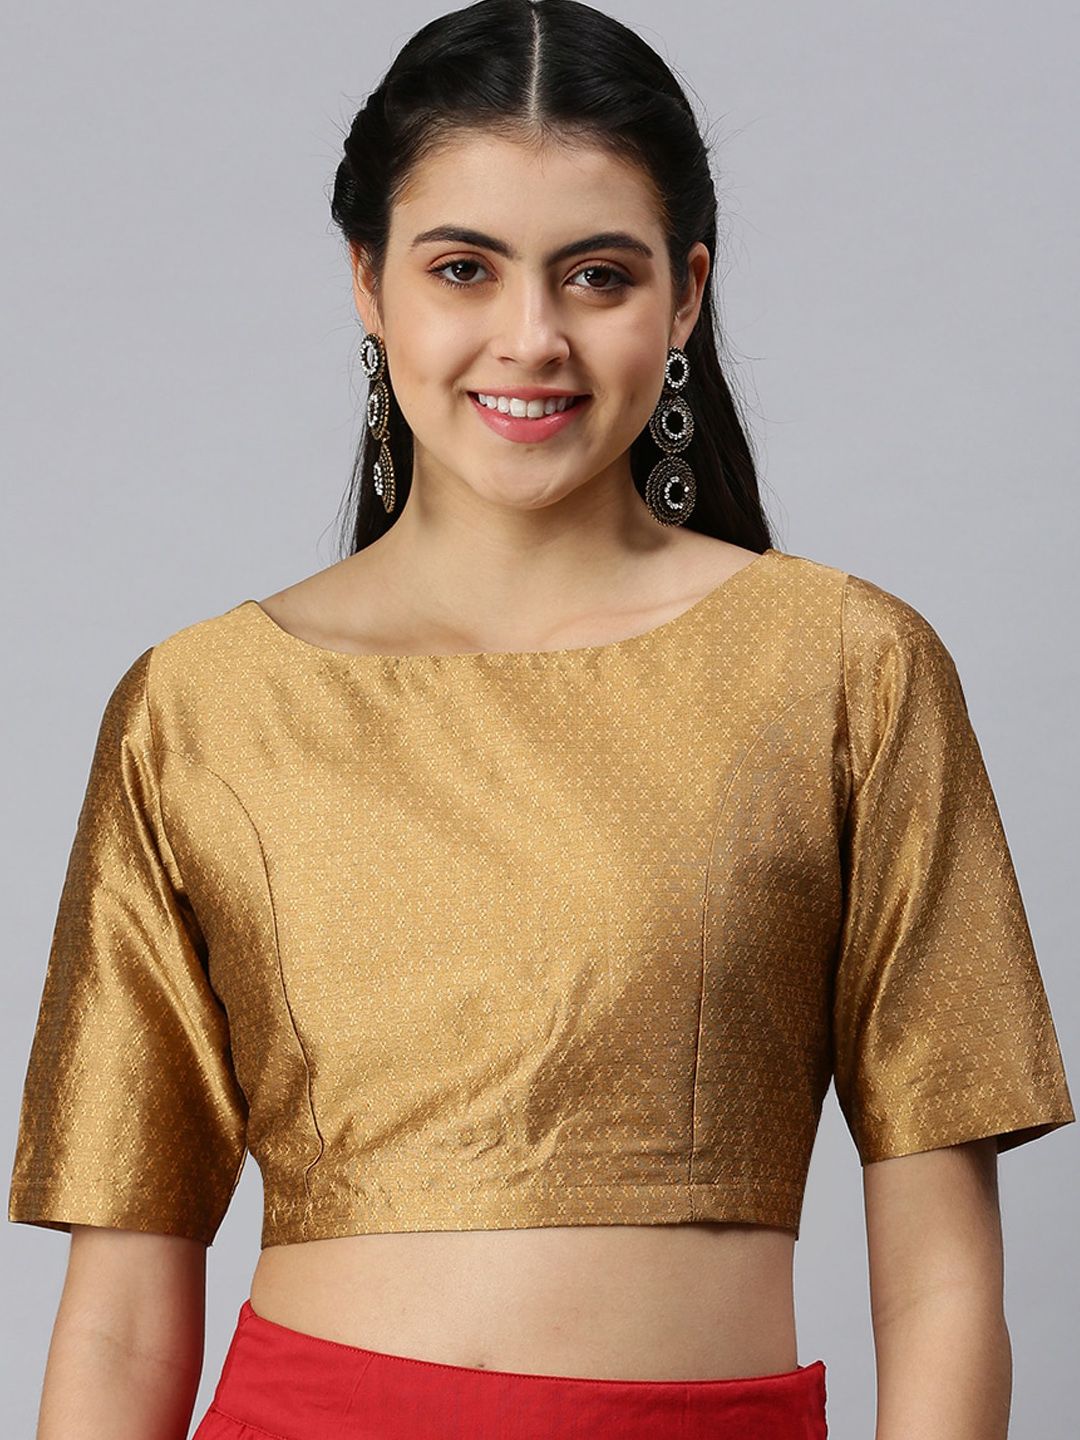 De Moza Women Gold-Toned Solid Saree Blouse Price in India